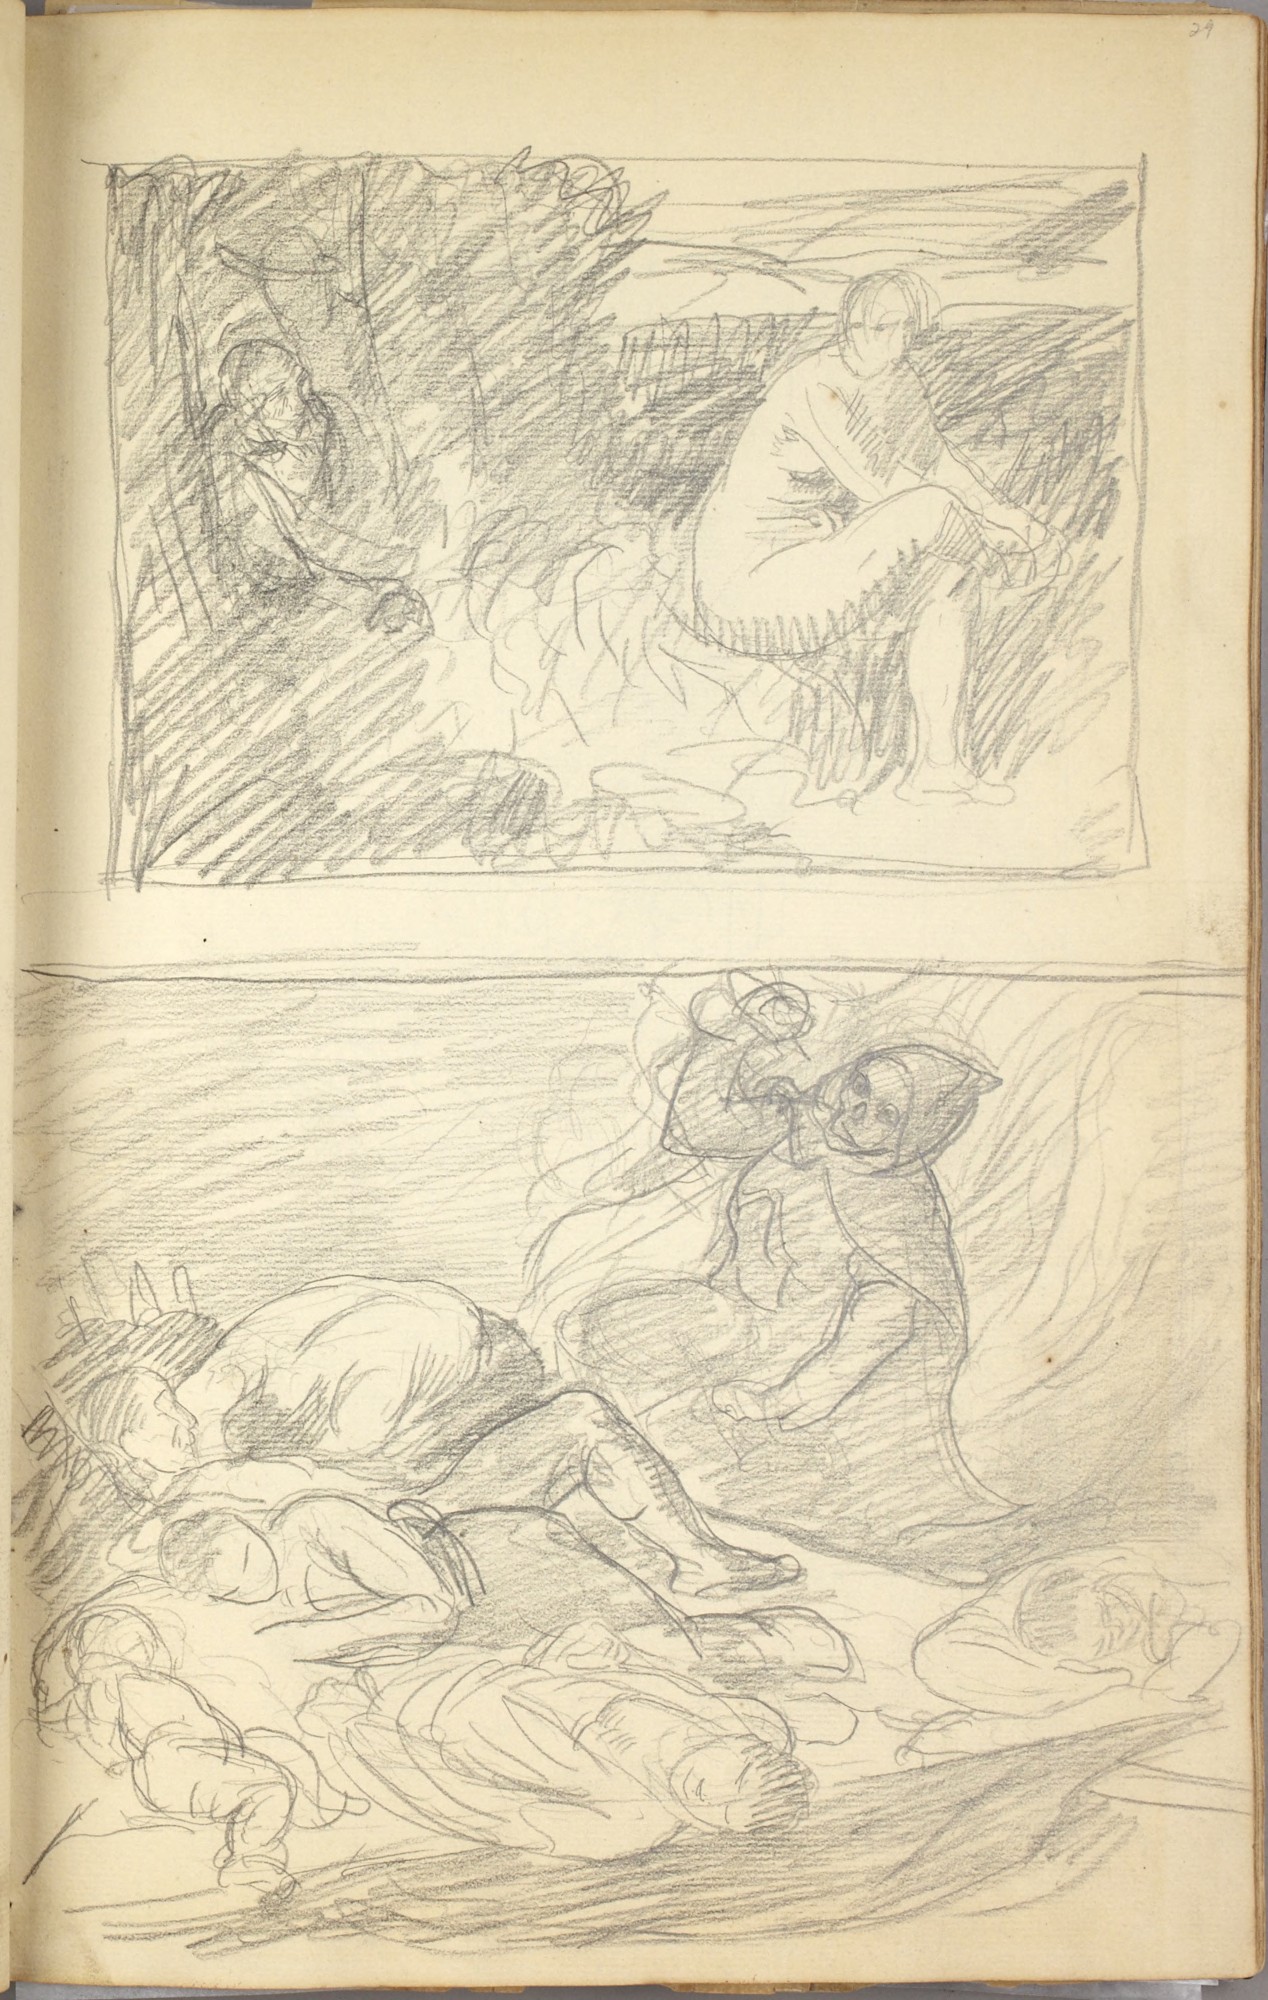 Top Drawing of nude woman in landscape, man in trees, possibly Susannah and the Elders; Bottom Drawing of Death (x1948-1677.29) pic